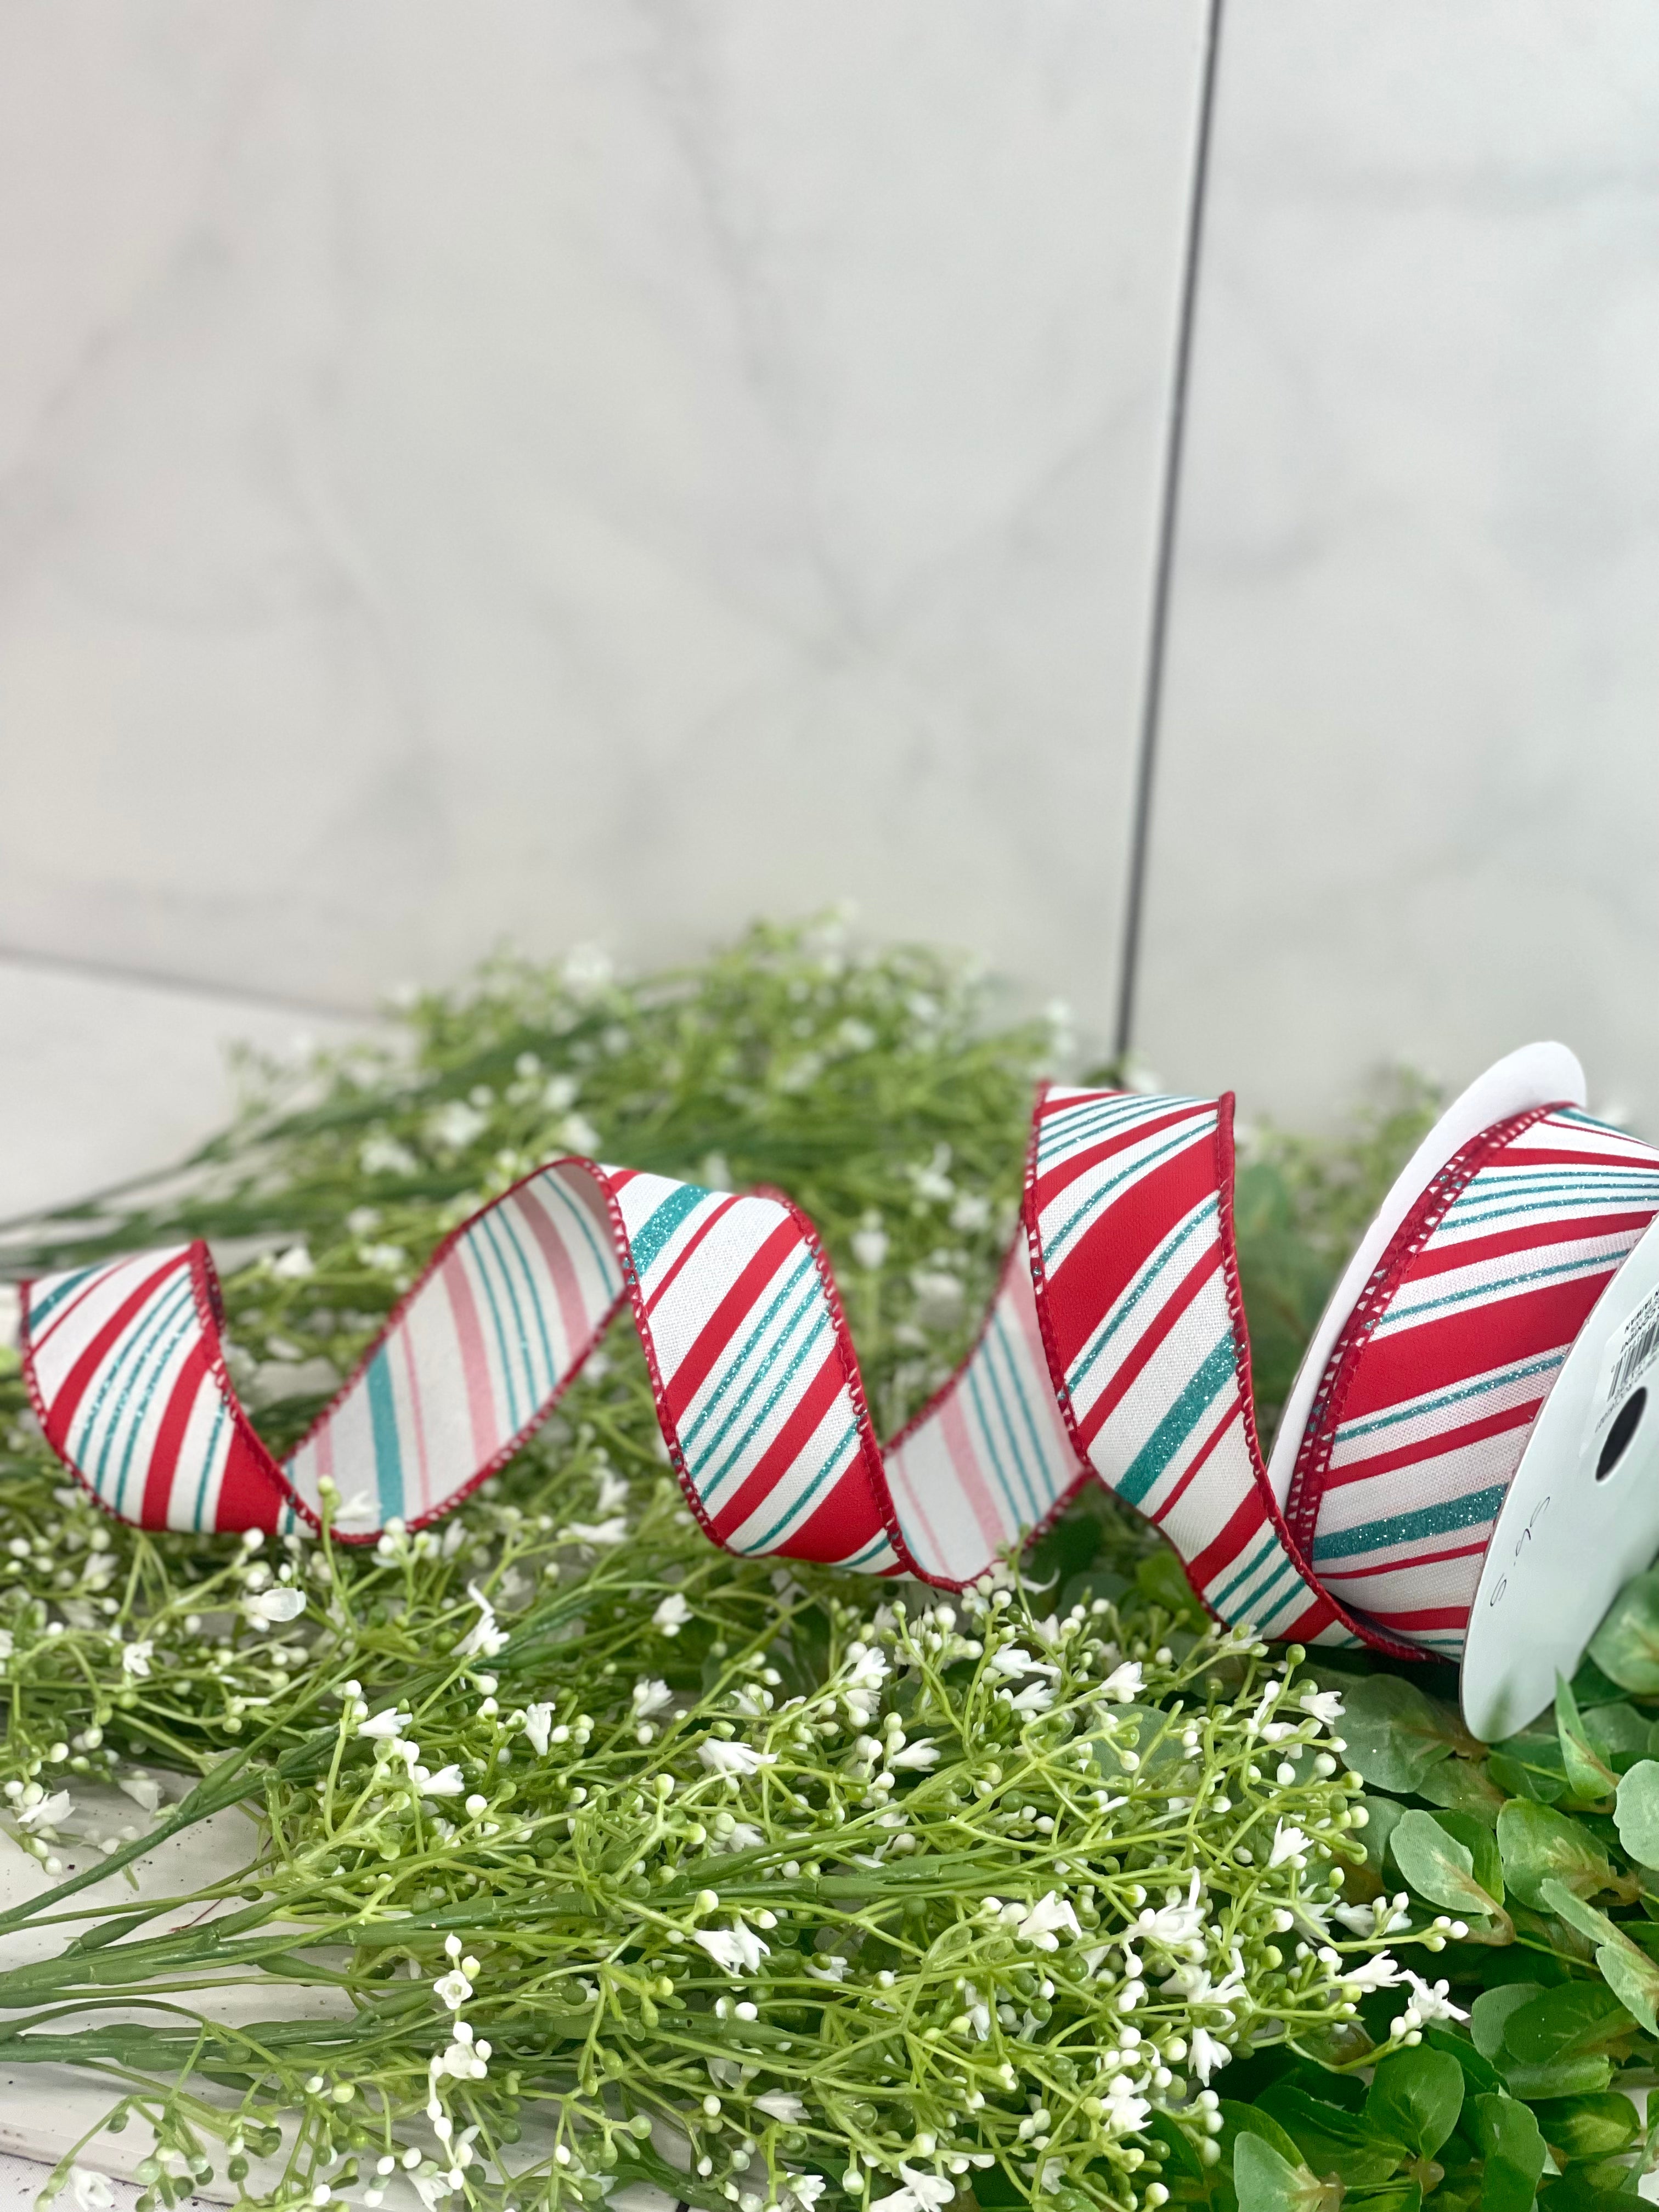 Wired Christmas Ribbon Red Stripes - 1 1/2 x 10 Yards, Red White  Peppermint Candy Cane, Garland, Gifts